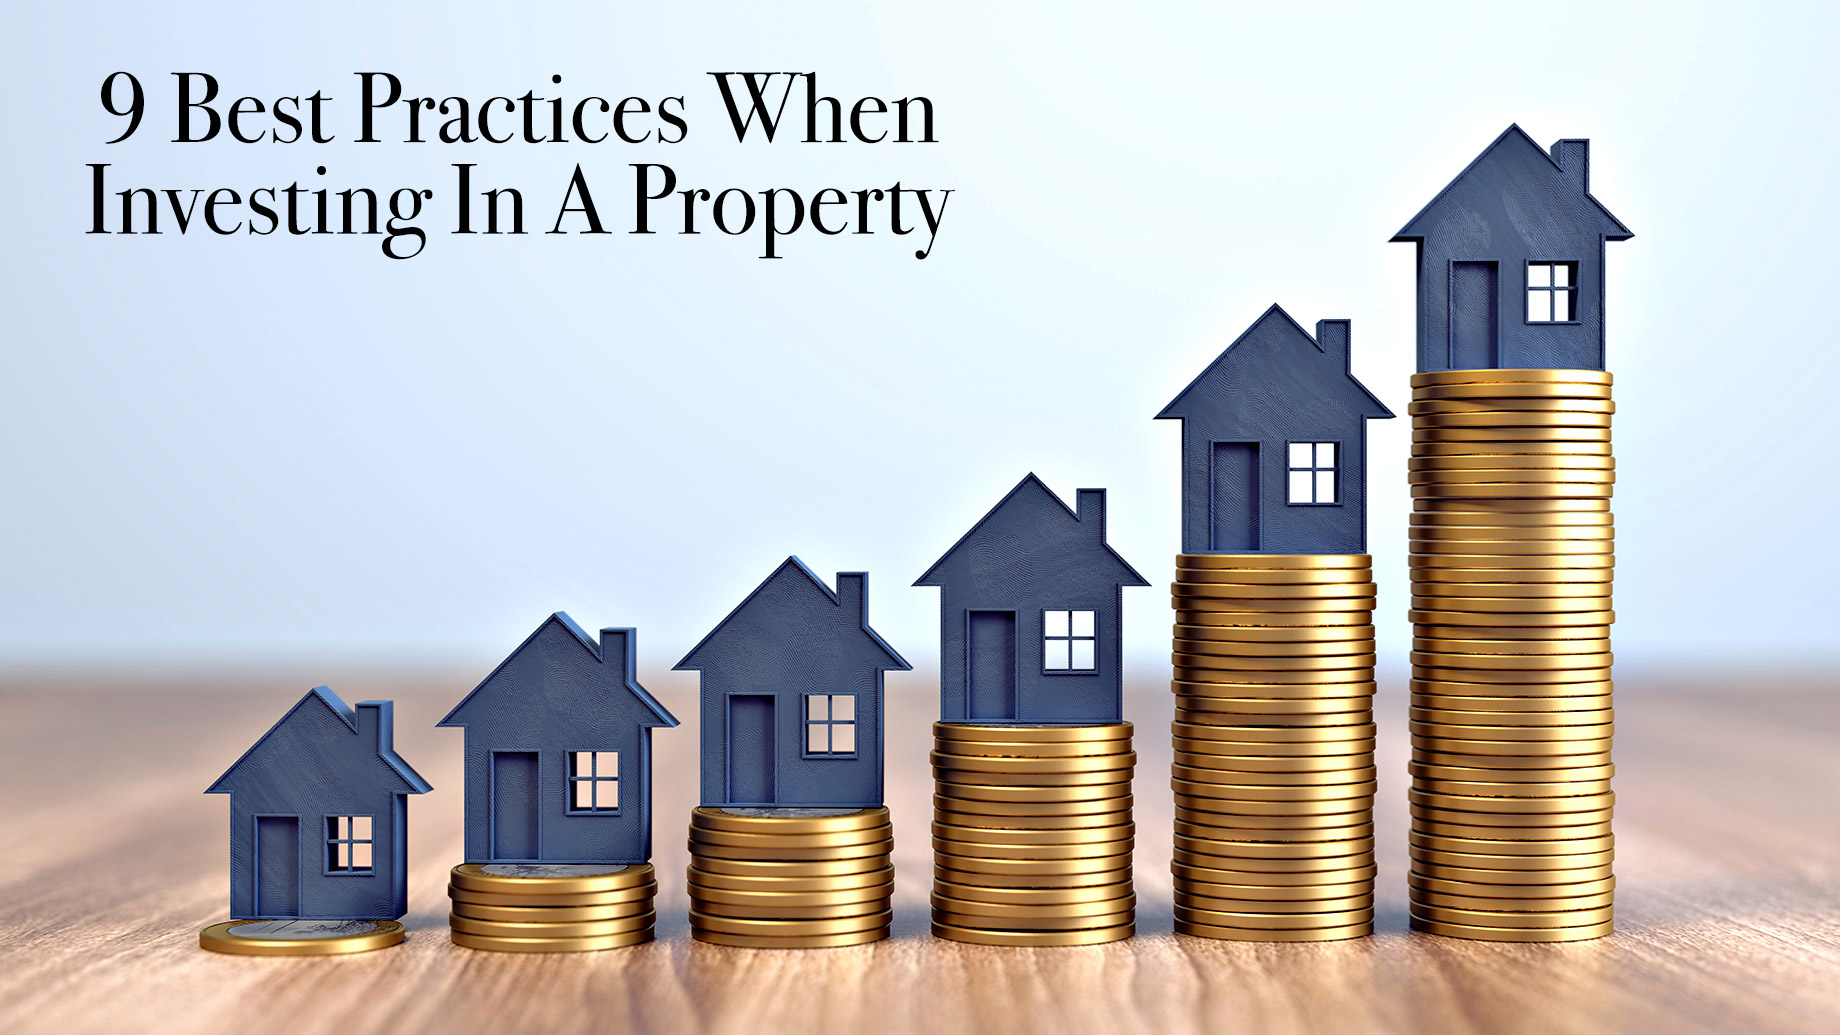 9 Best Practices When Investing In A Property